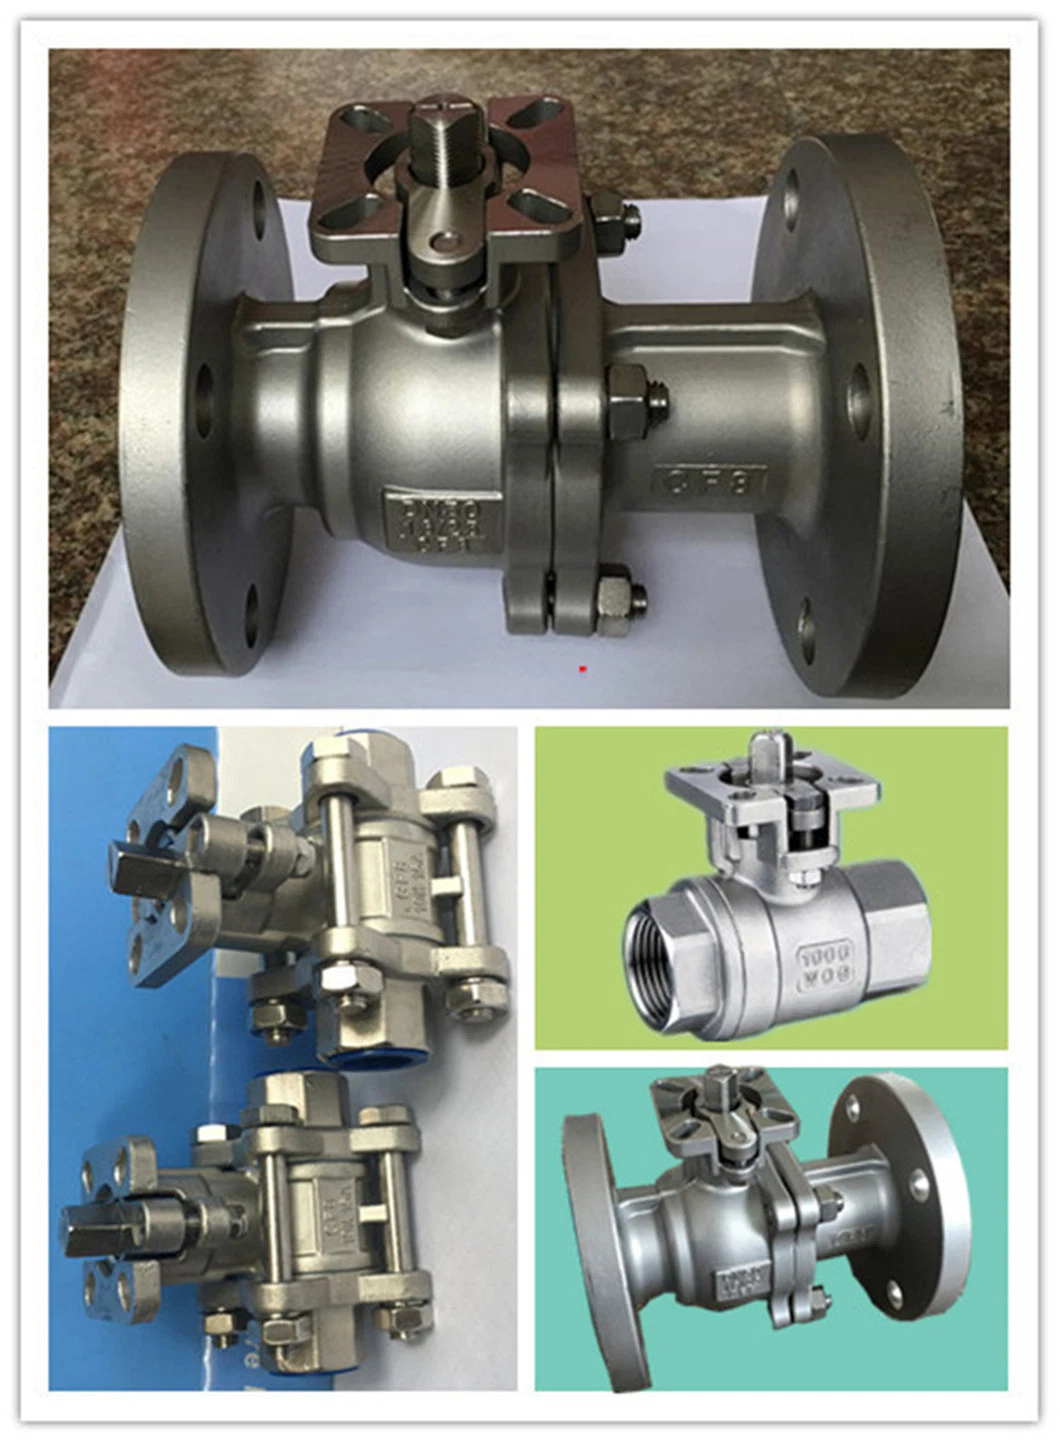 Investment Casted 2PC JIS/ANSI Flanged Stainless Steel SS304/SS316 Pneumatic Actuated Industrial Valve, Gate/Check/Water/ Globe/Ball Valve 10K 20K